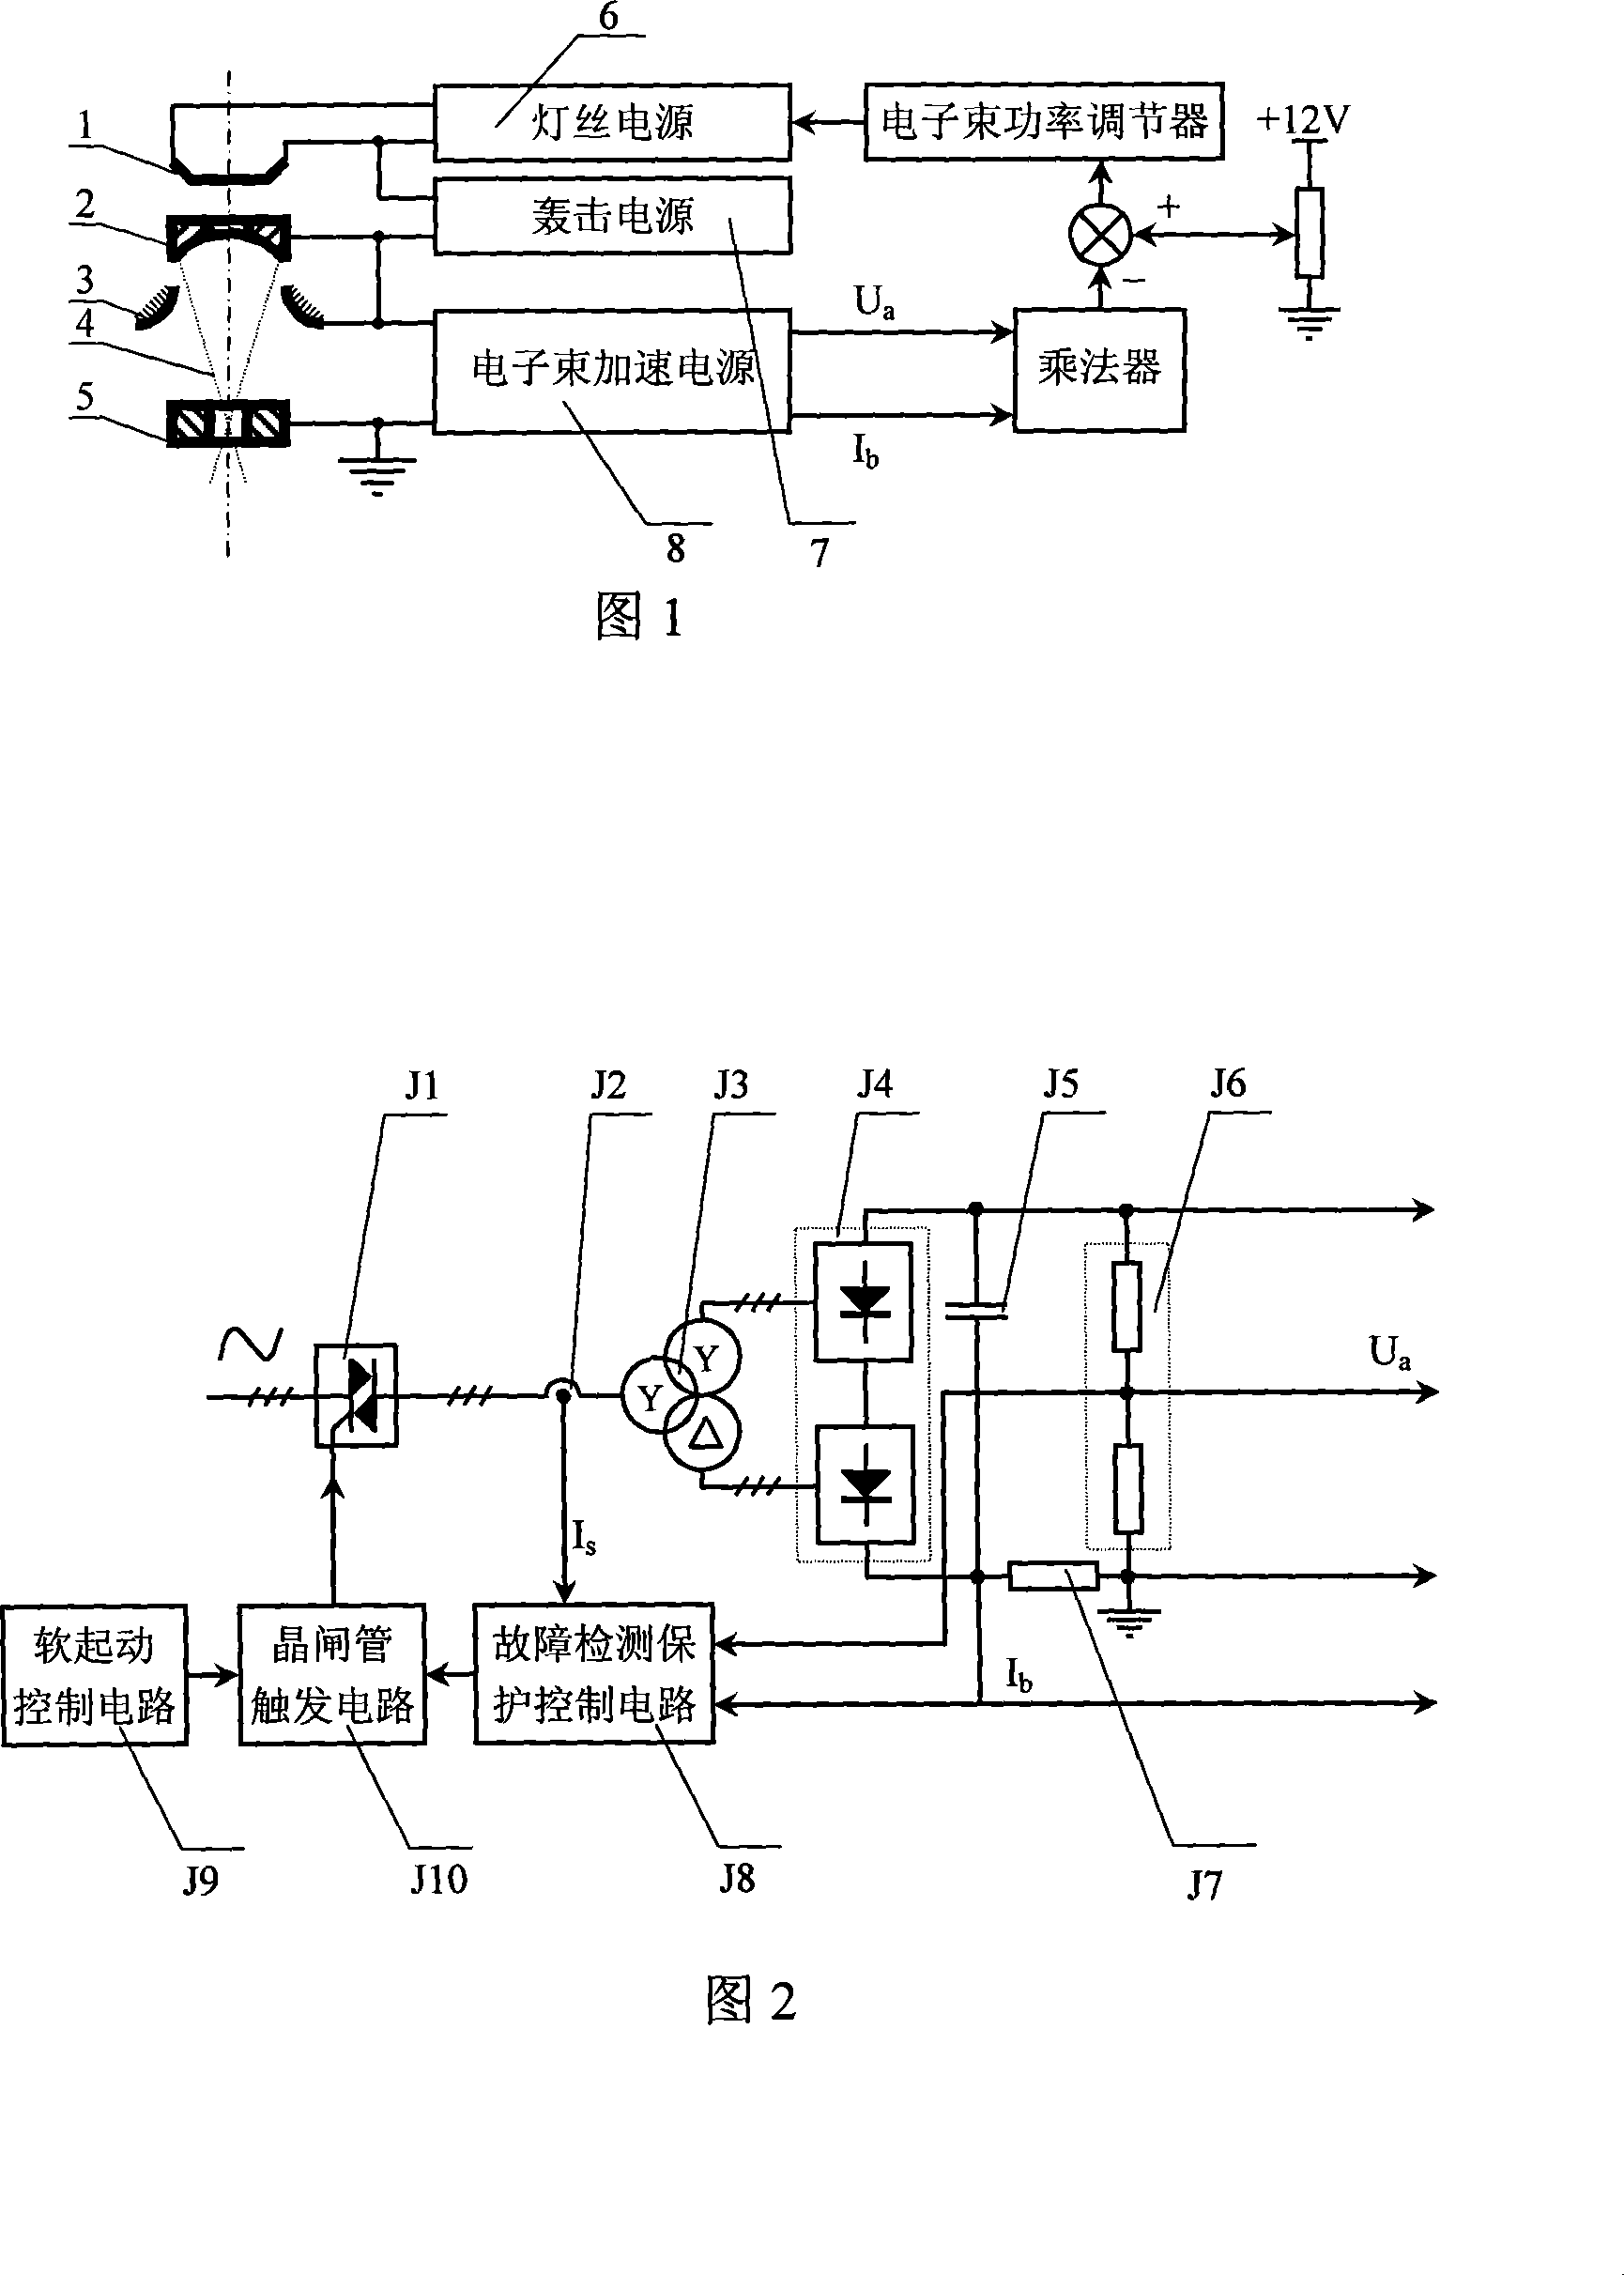 Power supply control method and power supply device for electron beam generating system of electron beam bombardment furnace